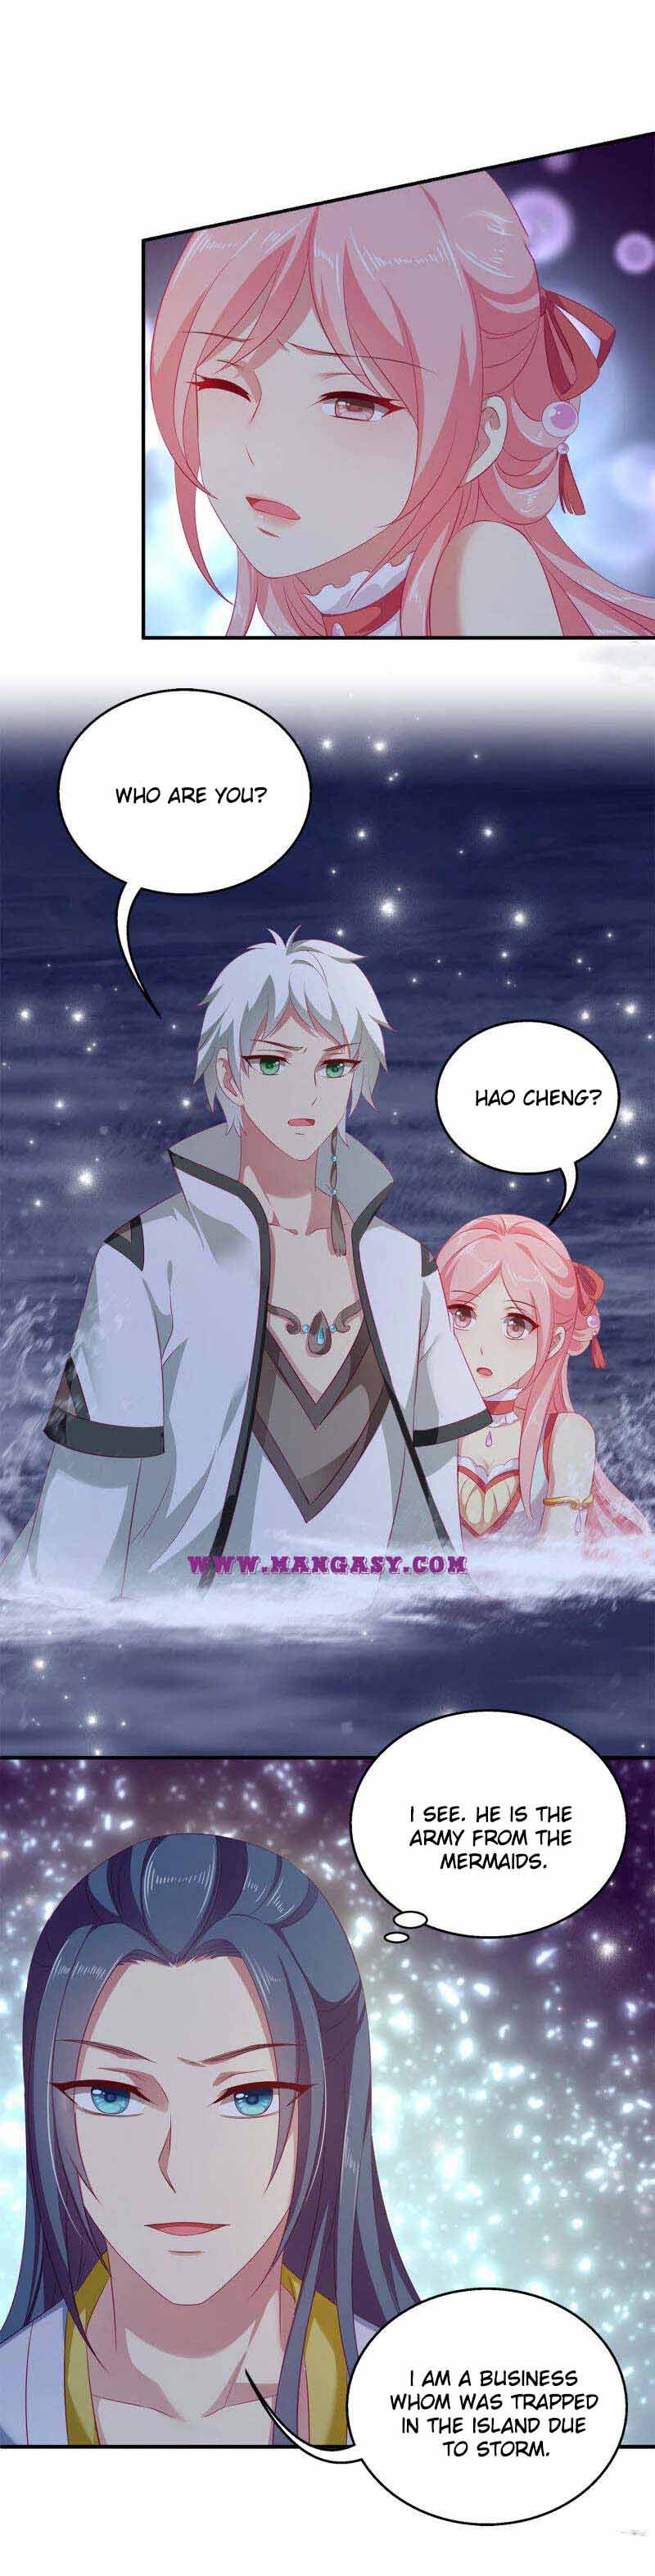 Mermaid Bride of The Dragon King chapter 5